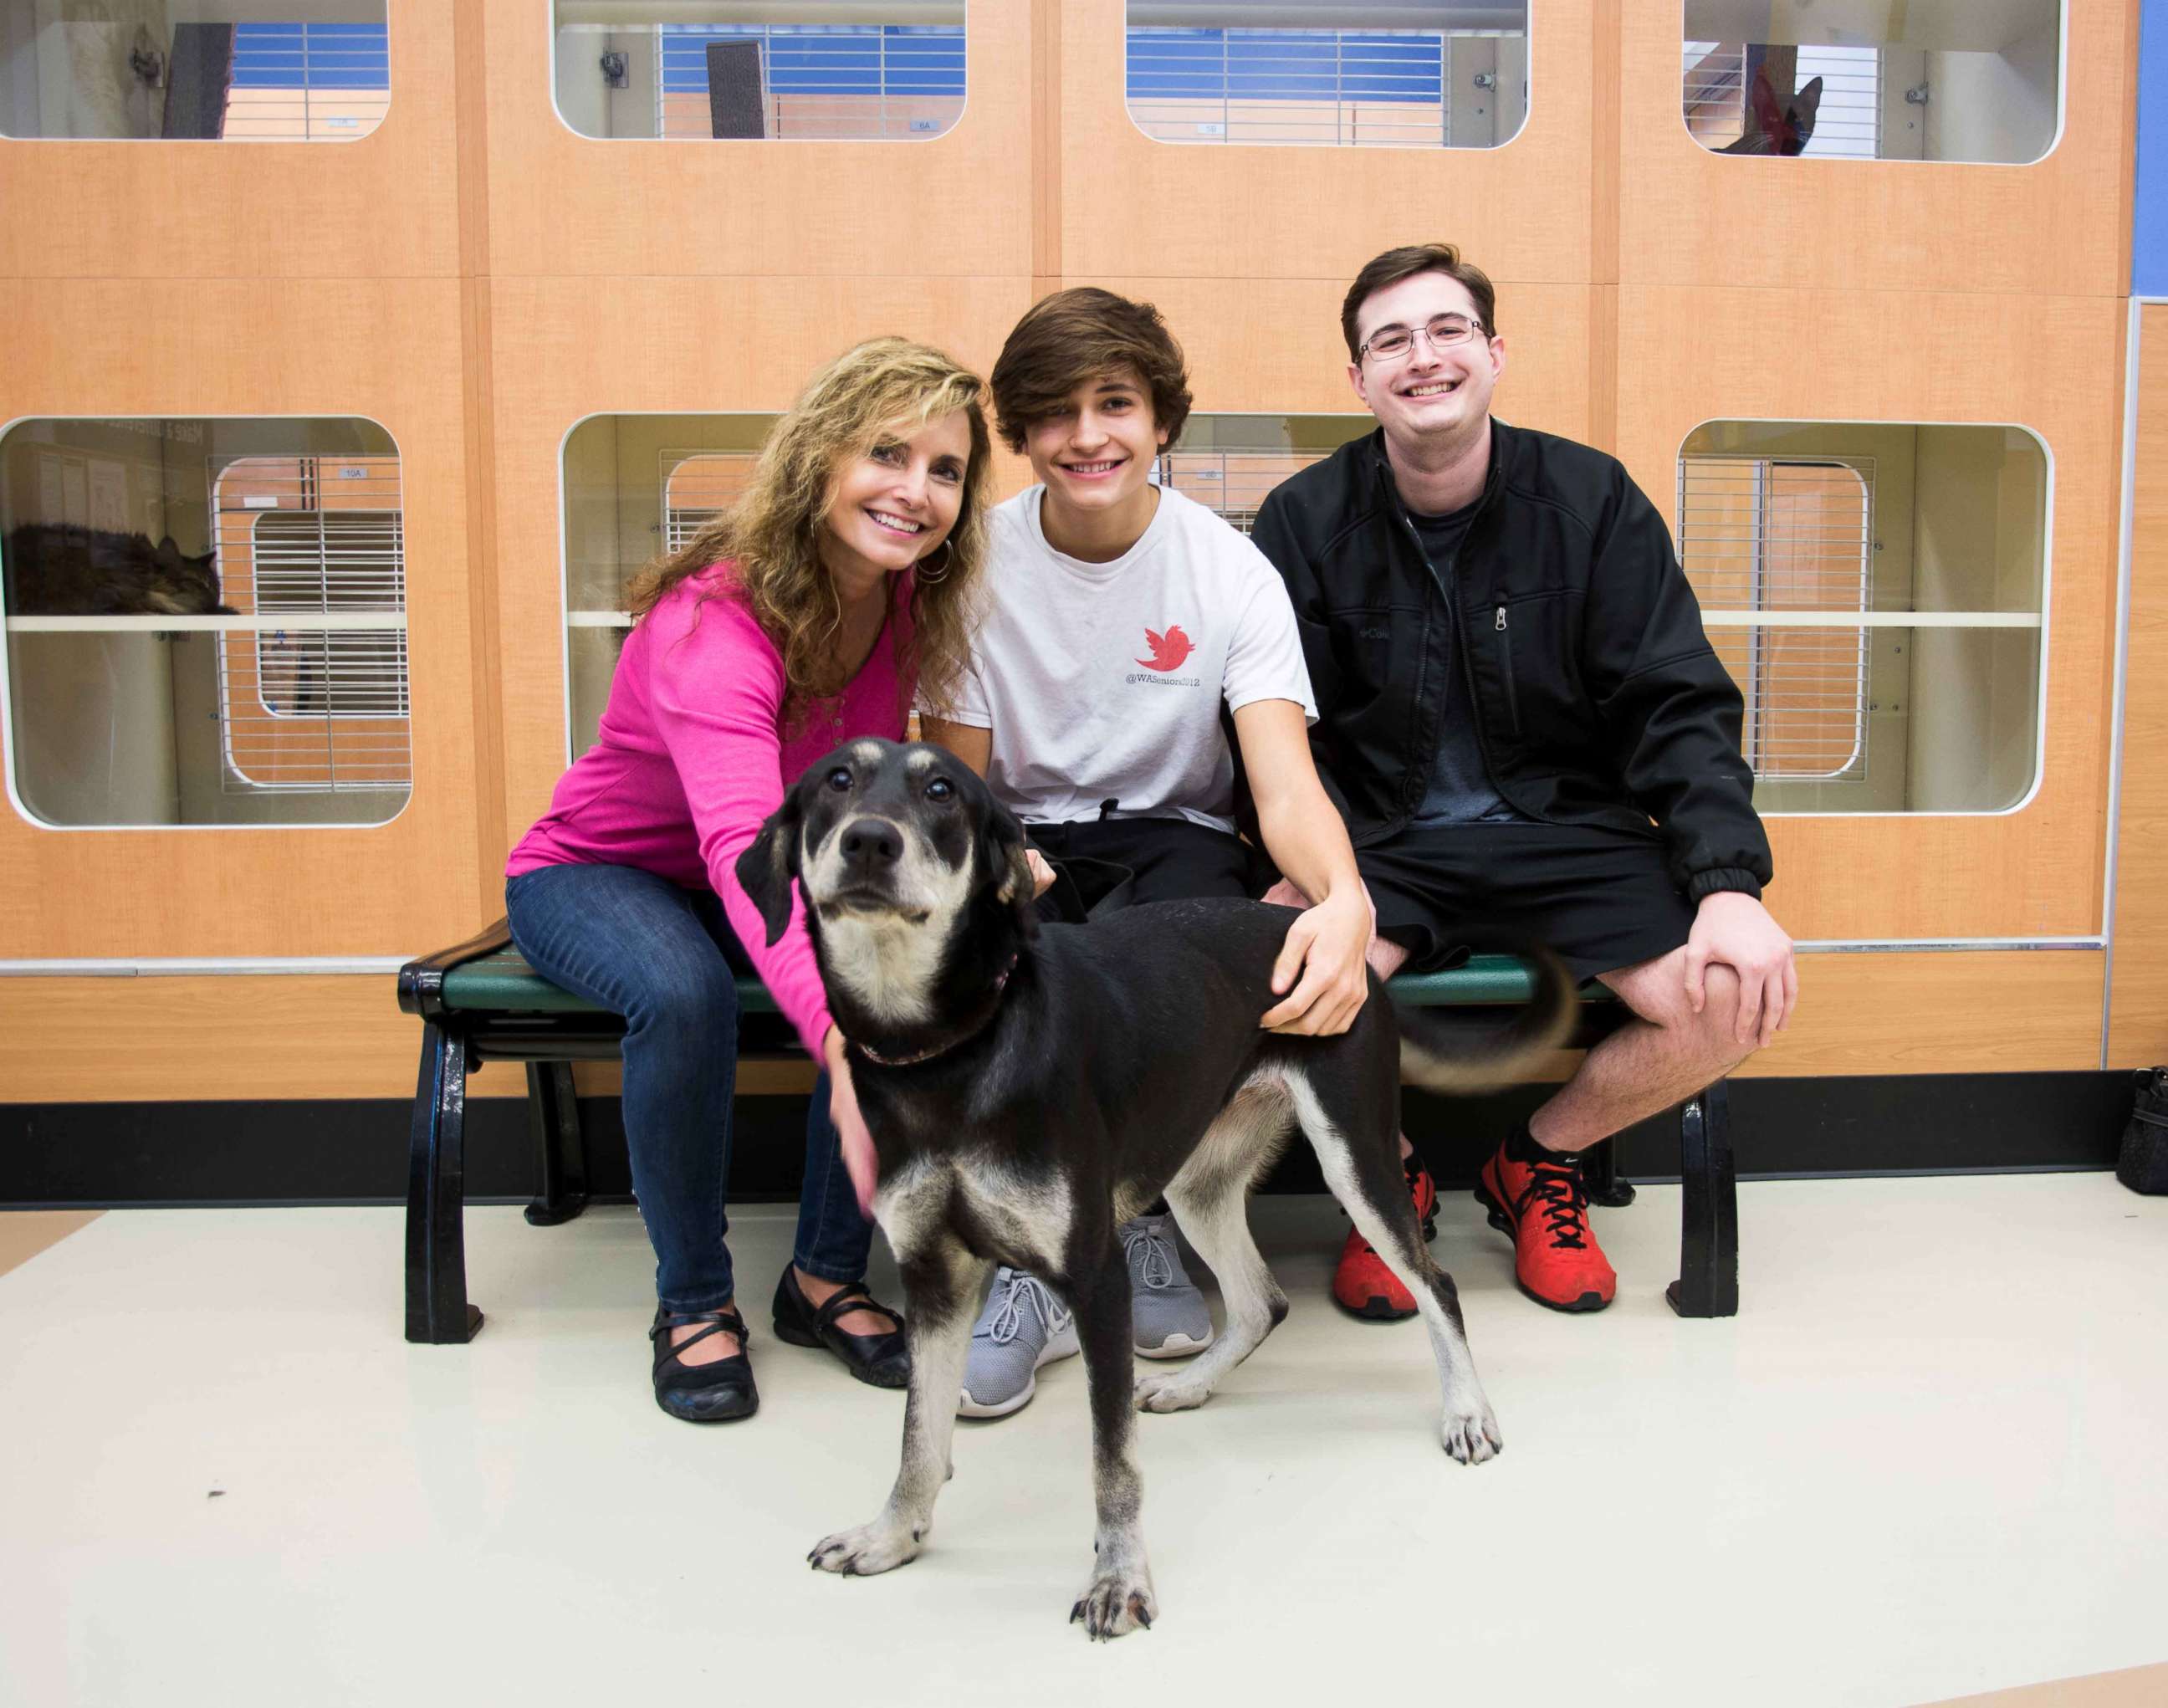 PHOTO: From Nov. 18 to 25, the dogs will get a break from the shelter to enjoy their new families.